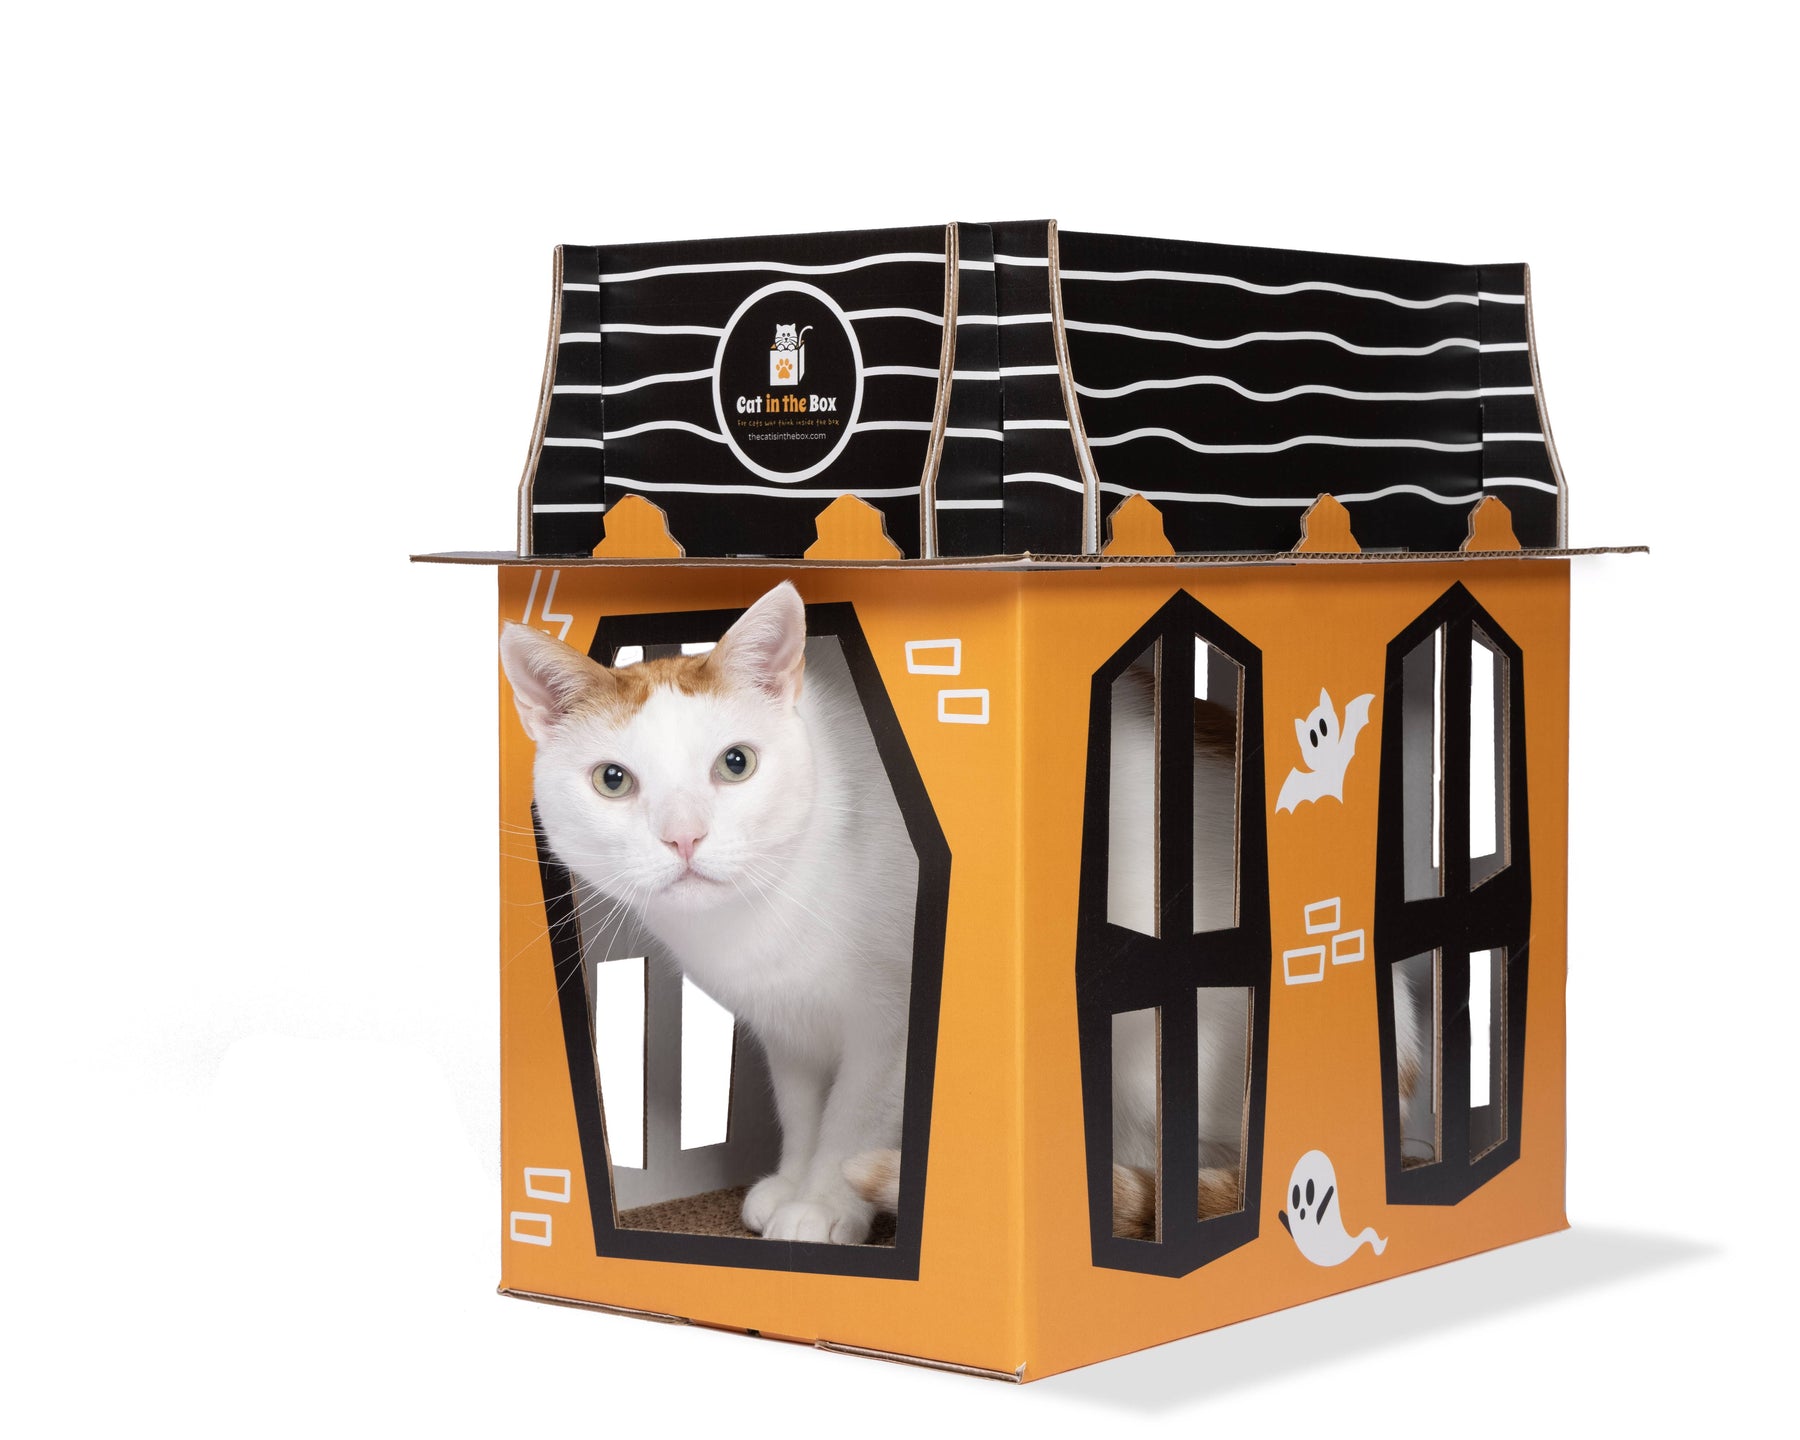 Spooky Cat Haunted House - Cardboard Box Playhouse for Cats-Southern Agriculture